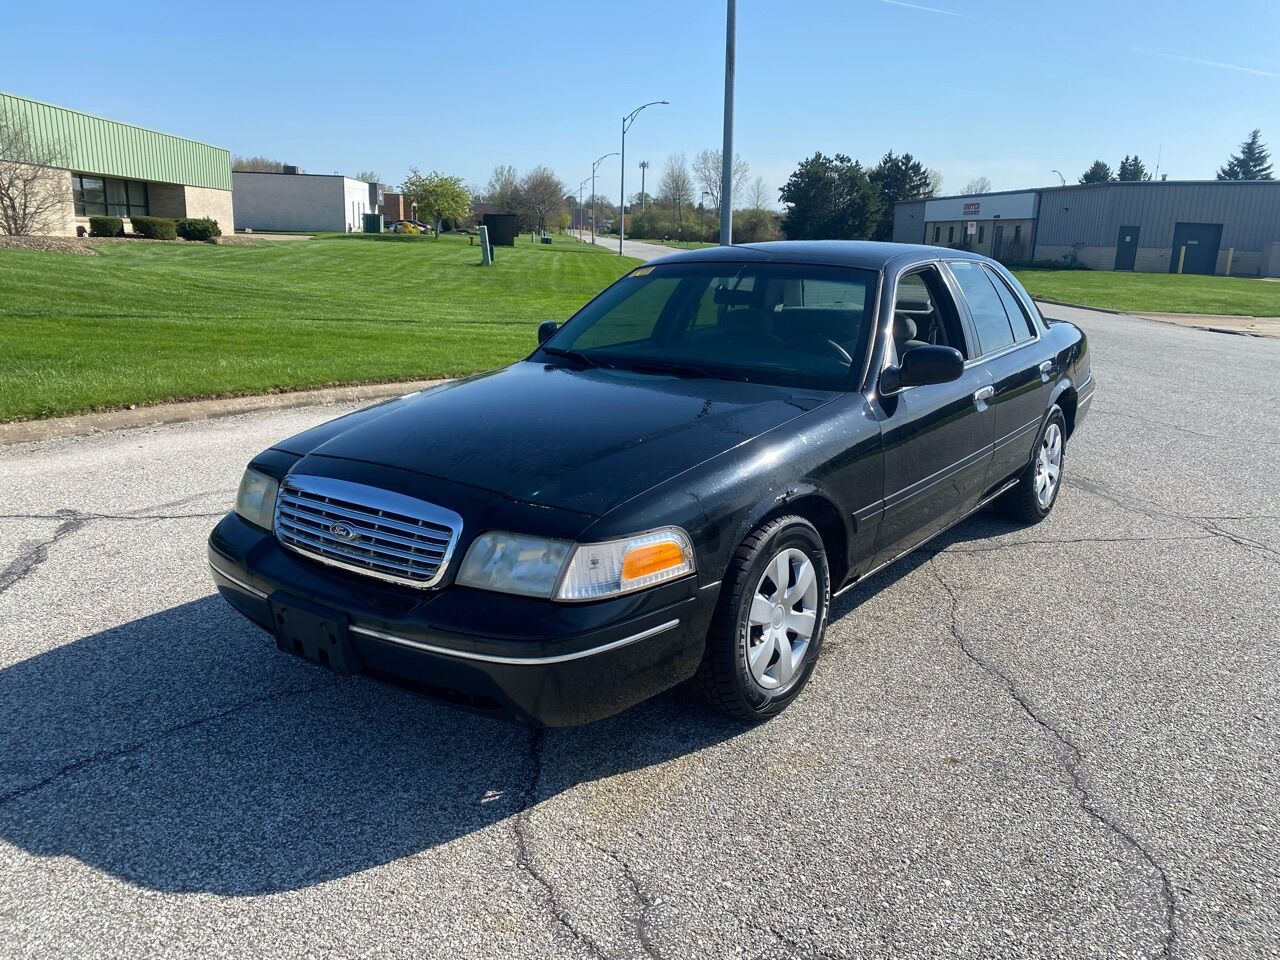 2001 Ford Crown Victoria For Sale - Carsforsale.com®